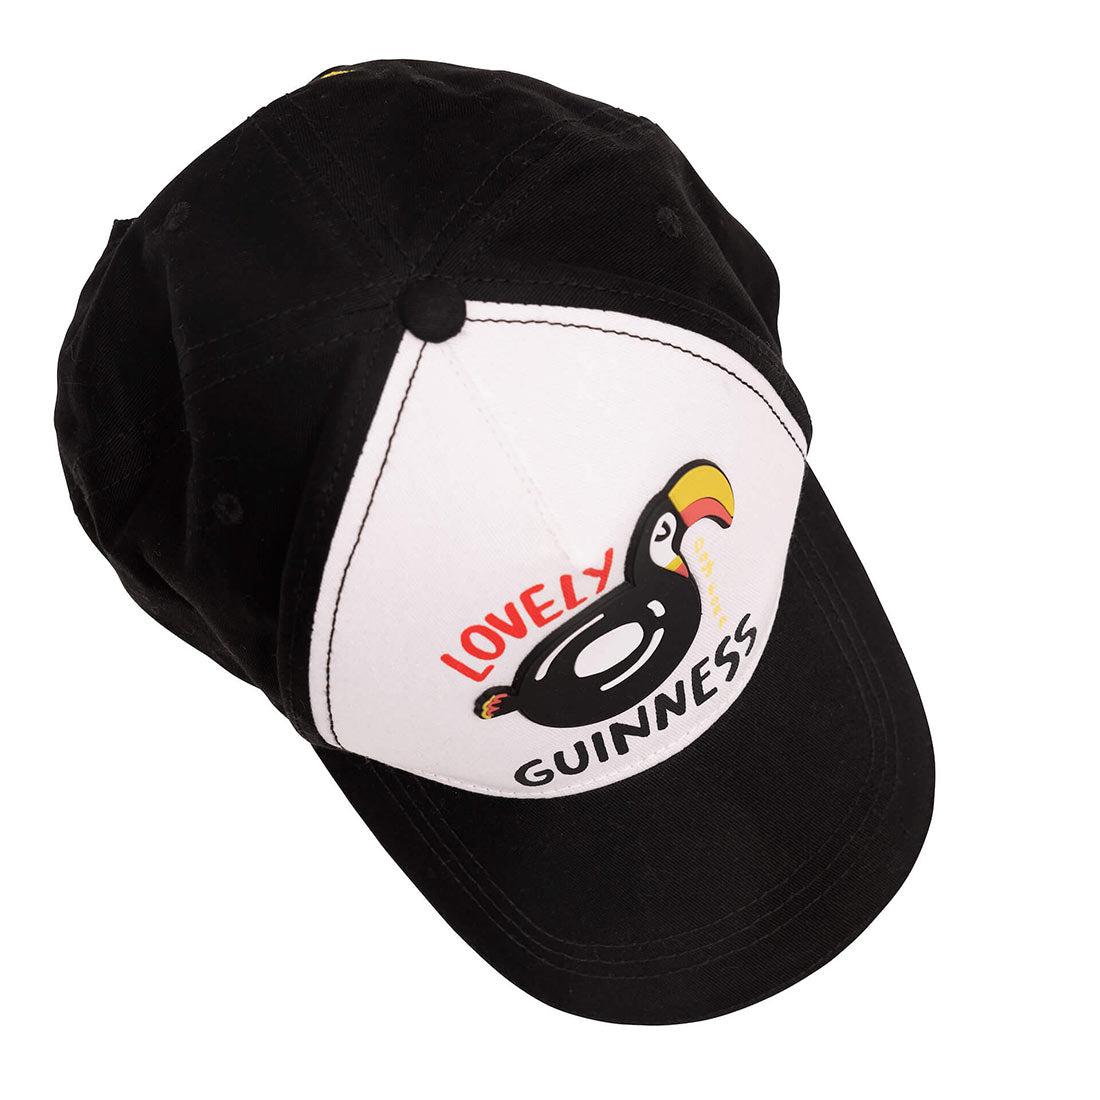 A black and white Guinness Webstore UK Toucan Cap with FATTI BURKE "LOVELY DAY FOR A GUINNESS" design.